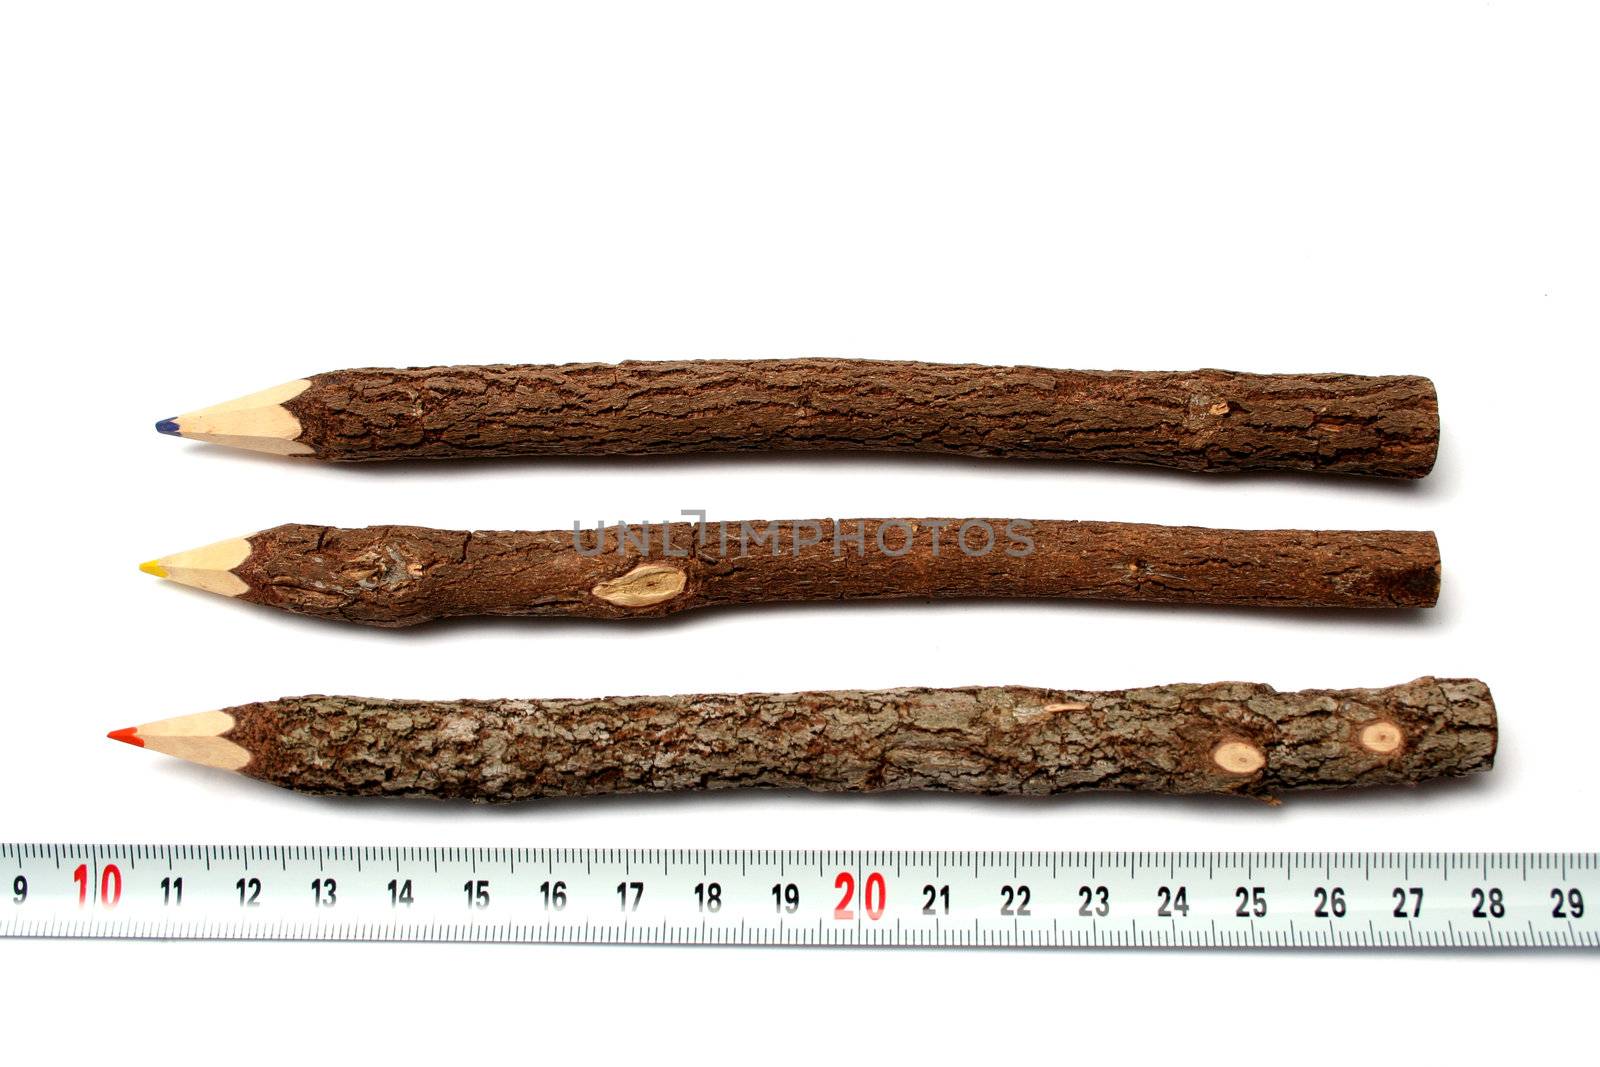 Three unusual pencils made of branches of a tree near to a measuring ruler